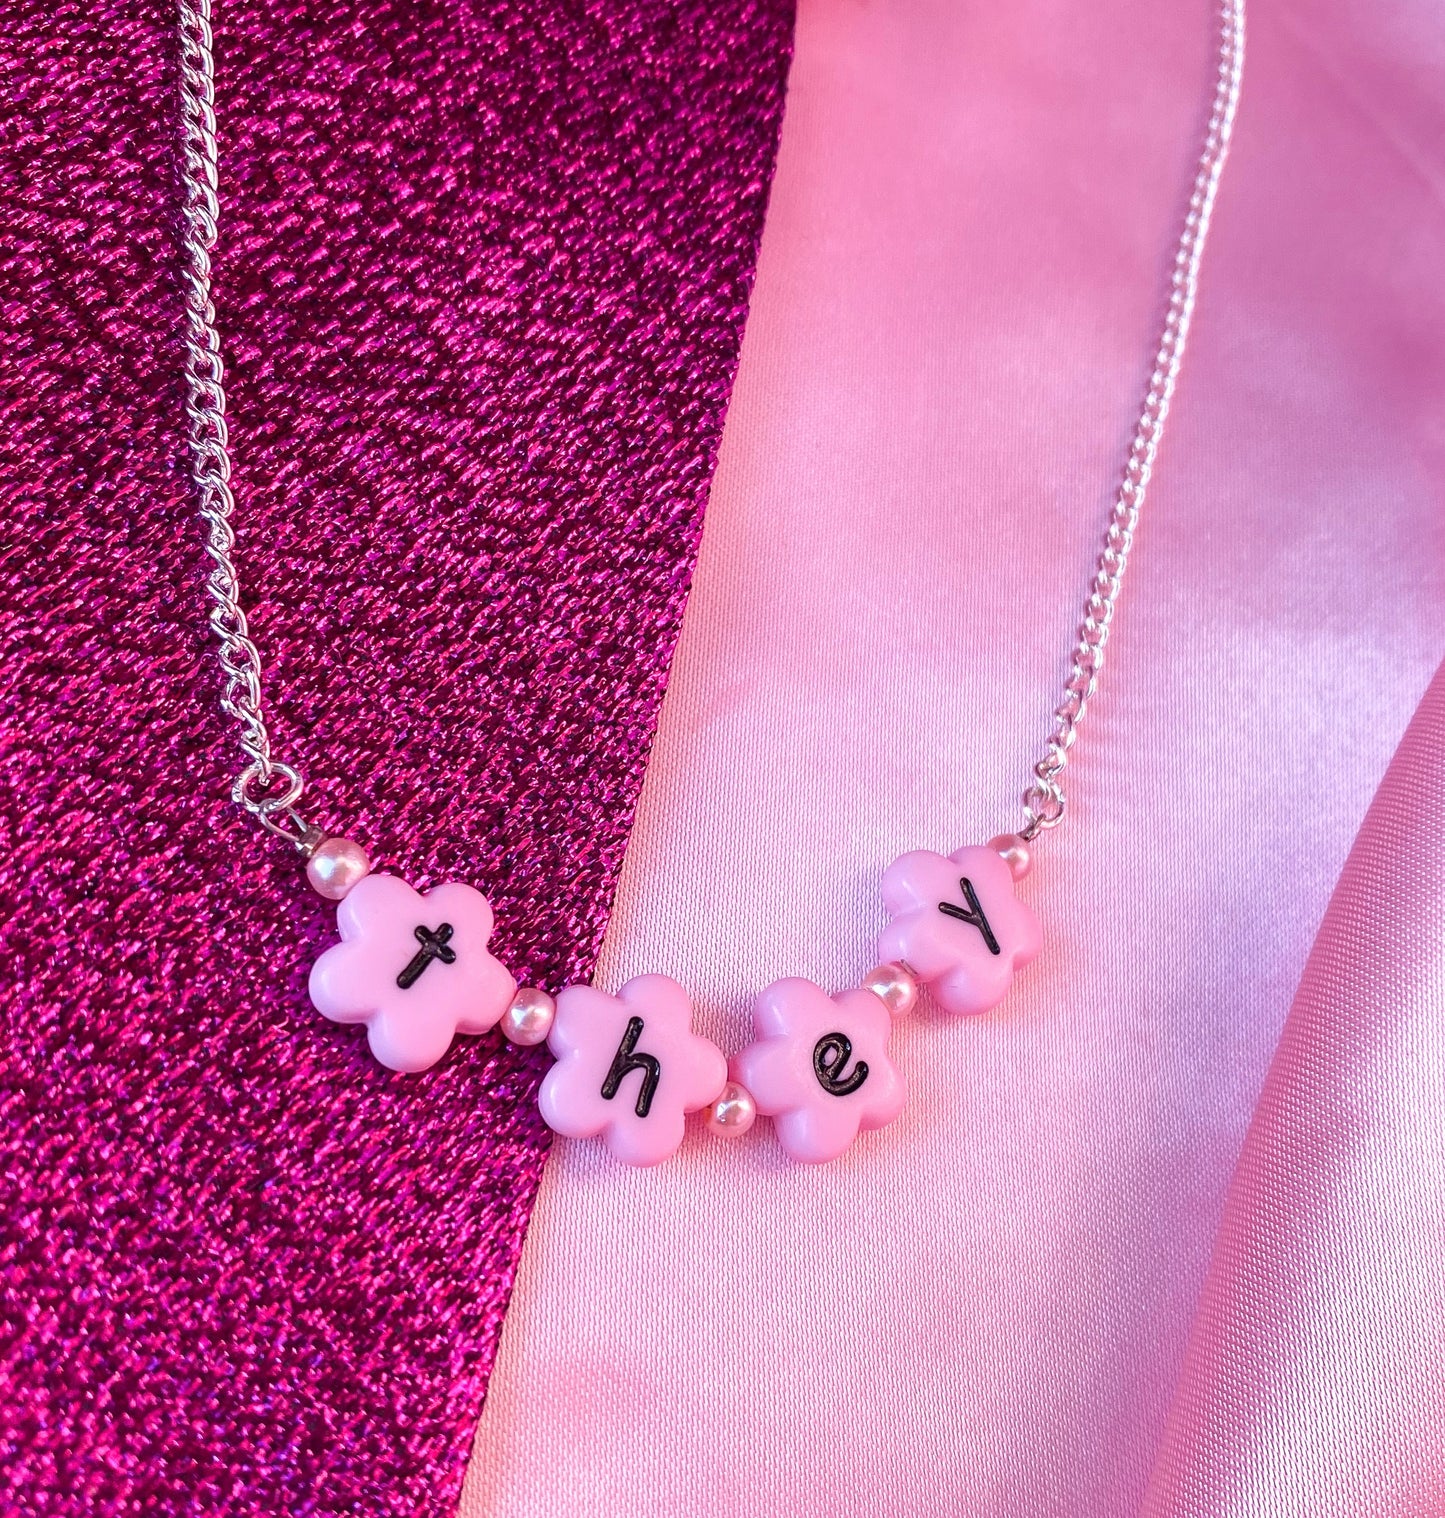 Pink THEY flower shape letter bead necklace